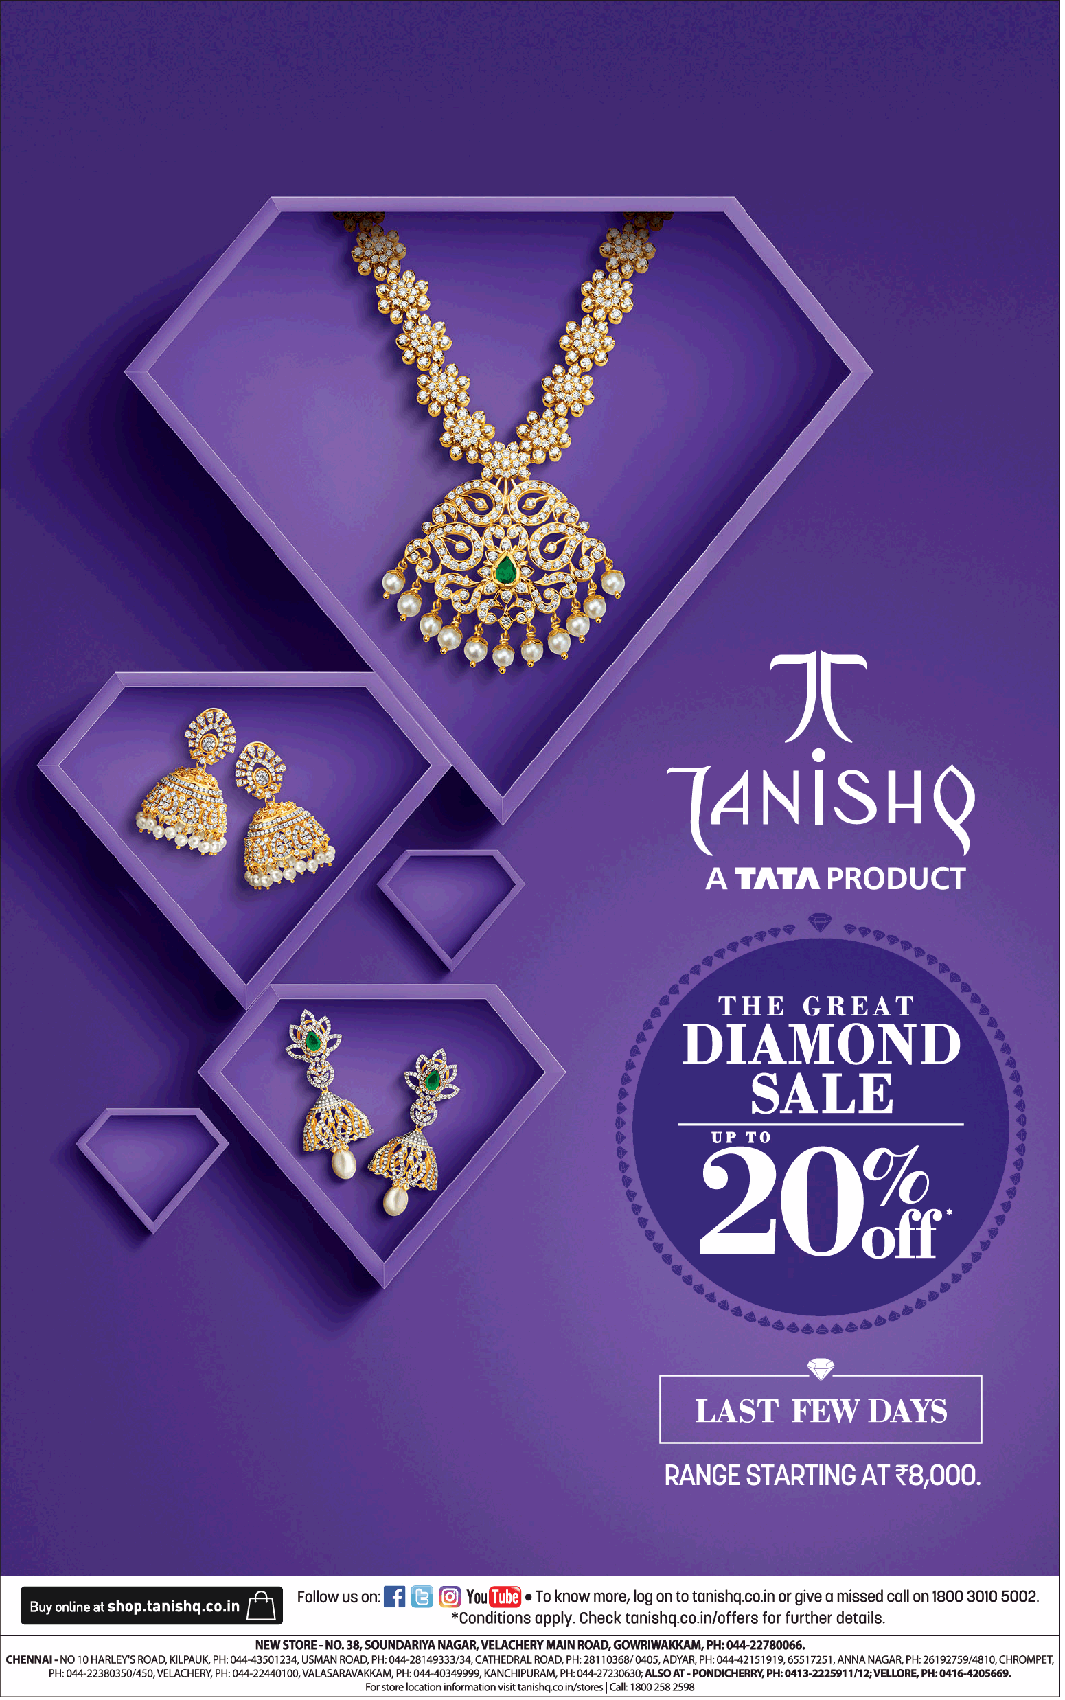 tanishq-a-tata-product-the-great-diamond-sale-upto-20%-off-ad-chennai-times-22-02-2019.png